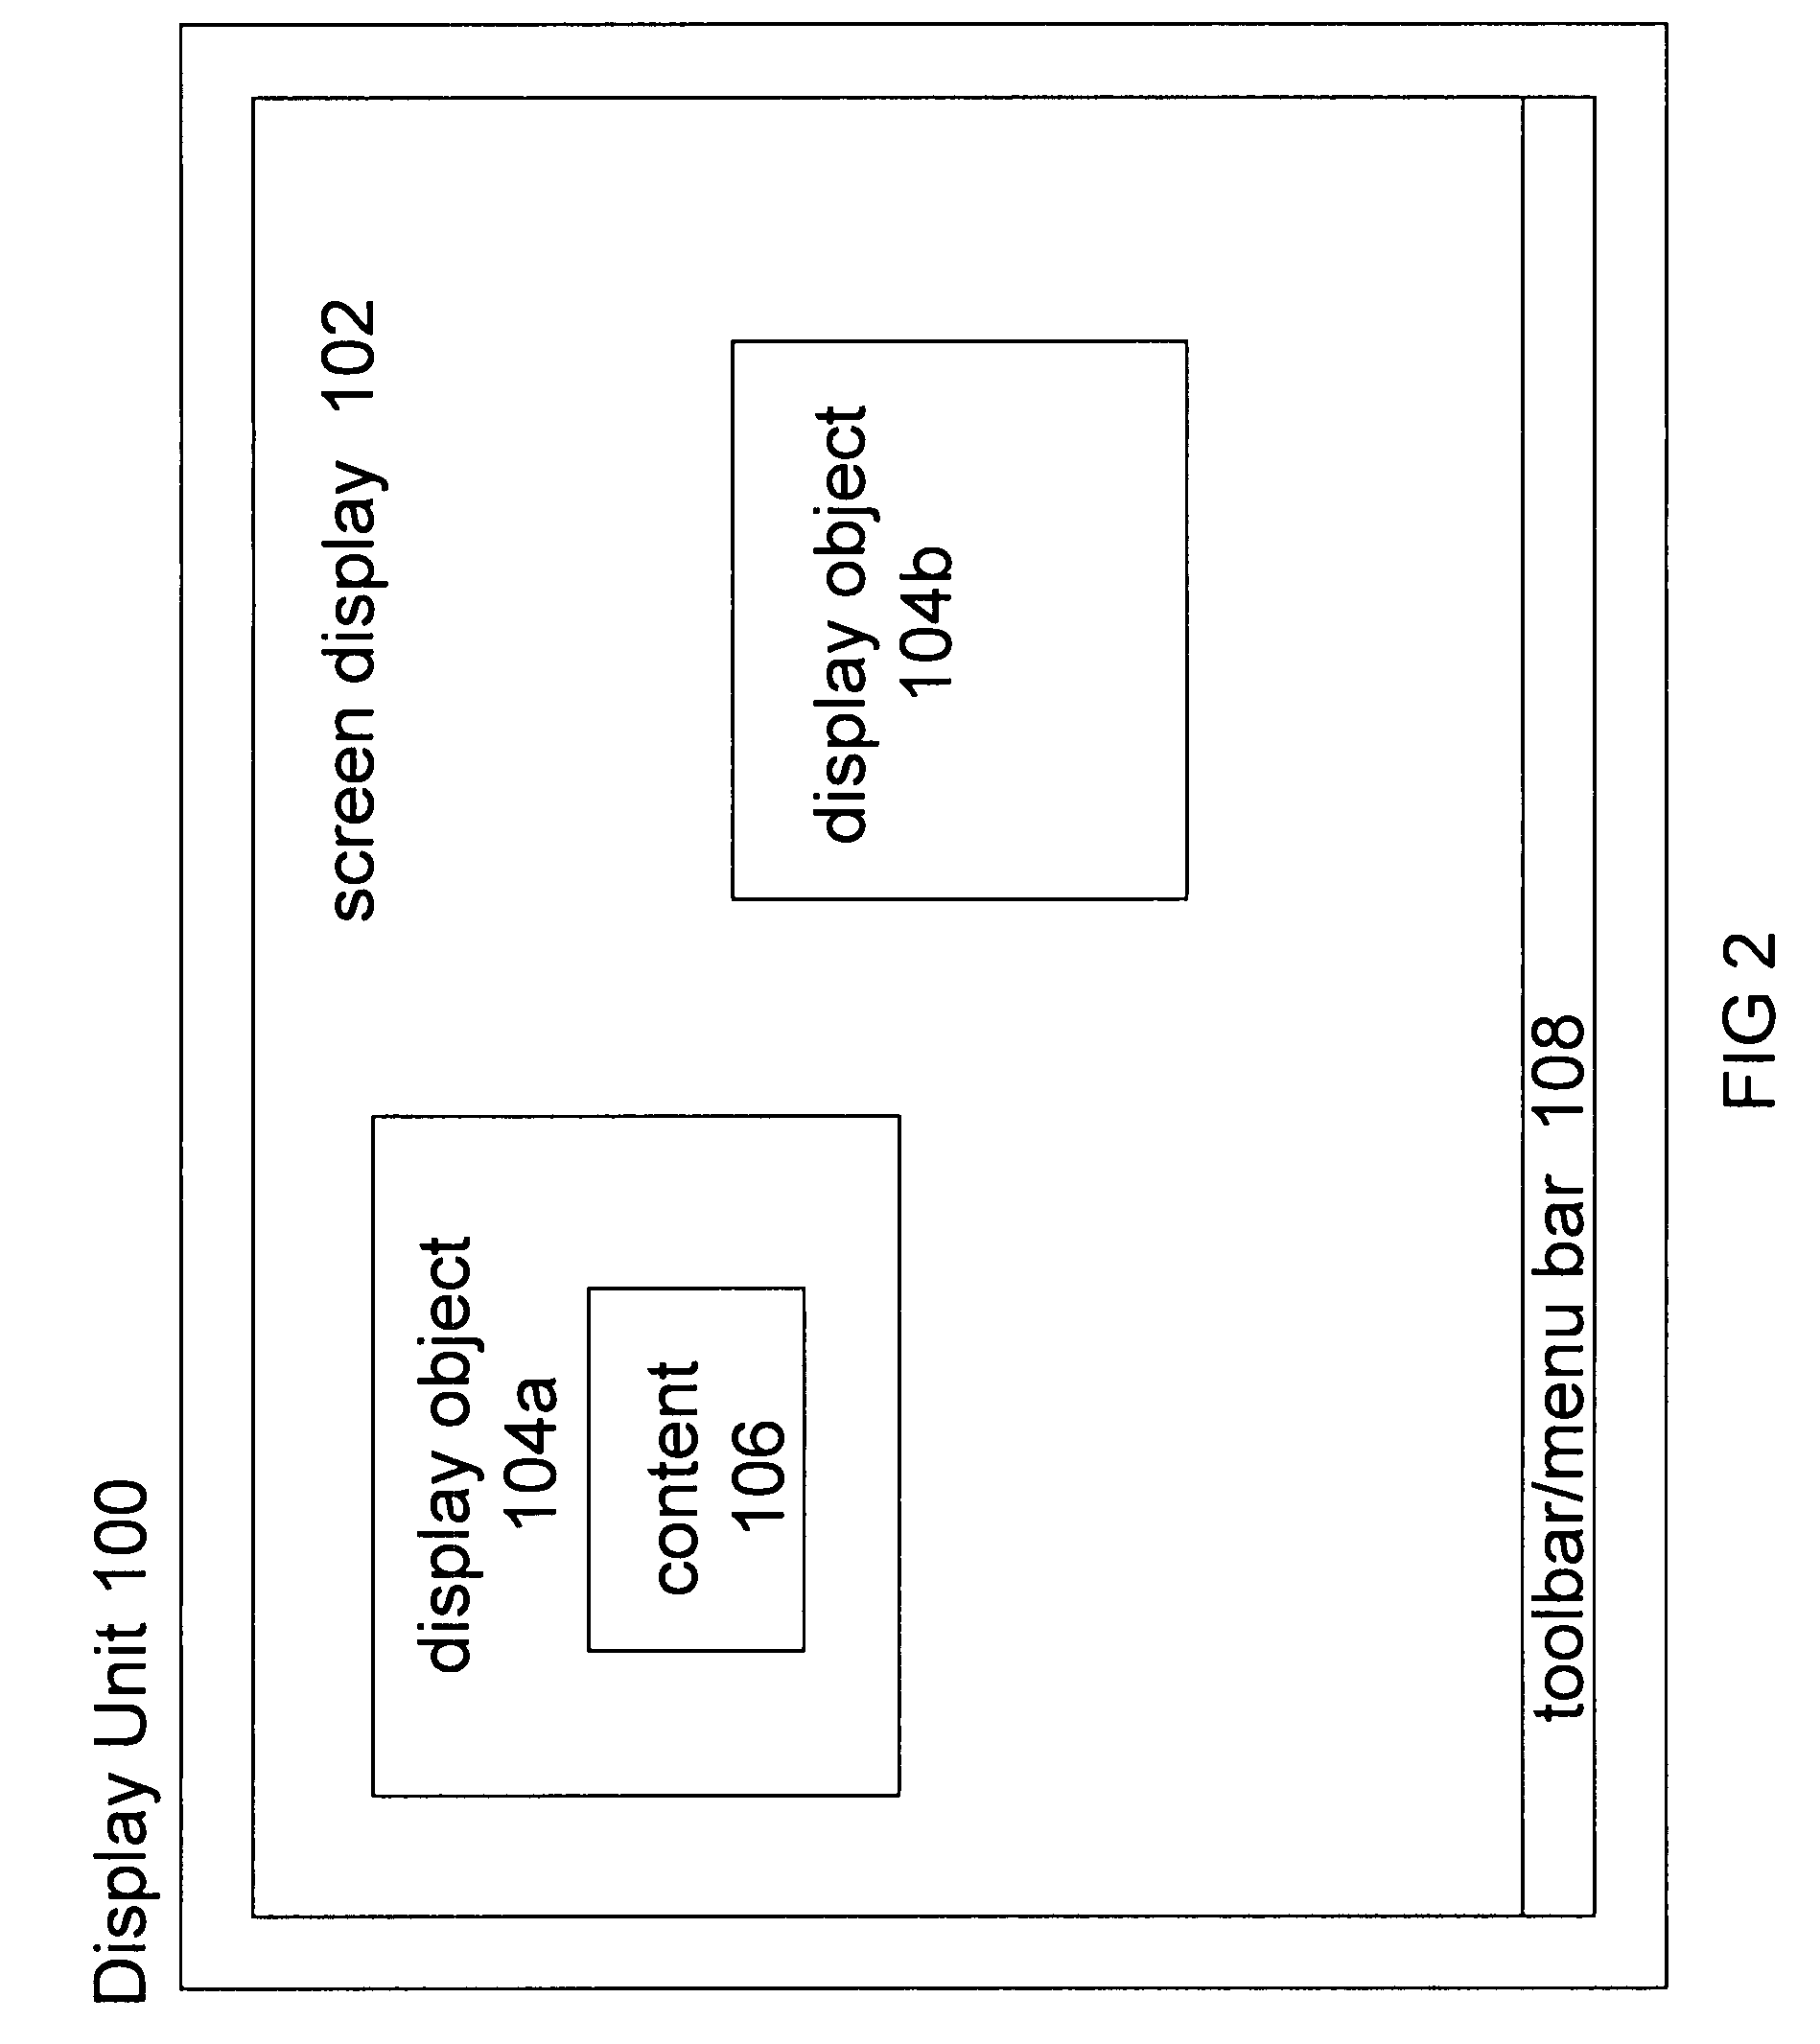 Detecting movement of a computer device to effect movement of selected display objects